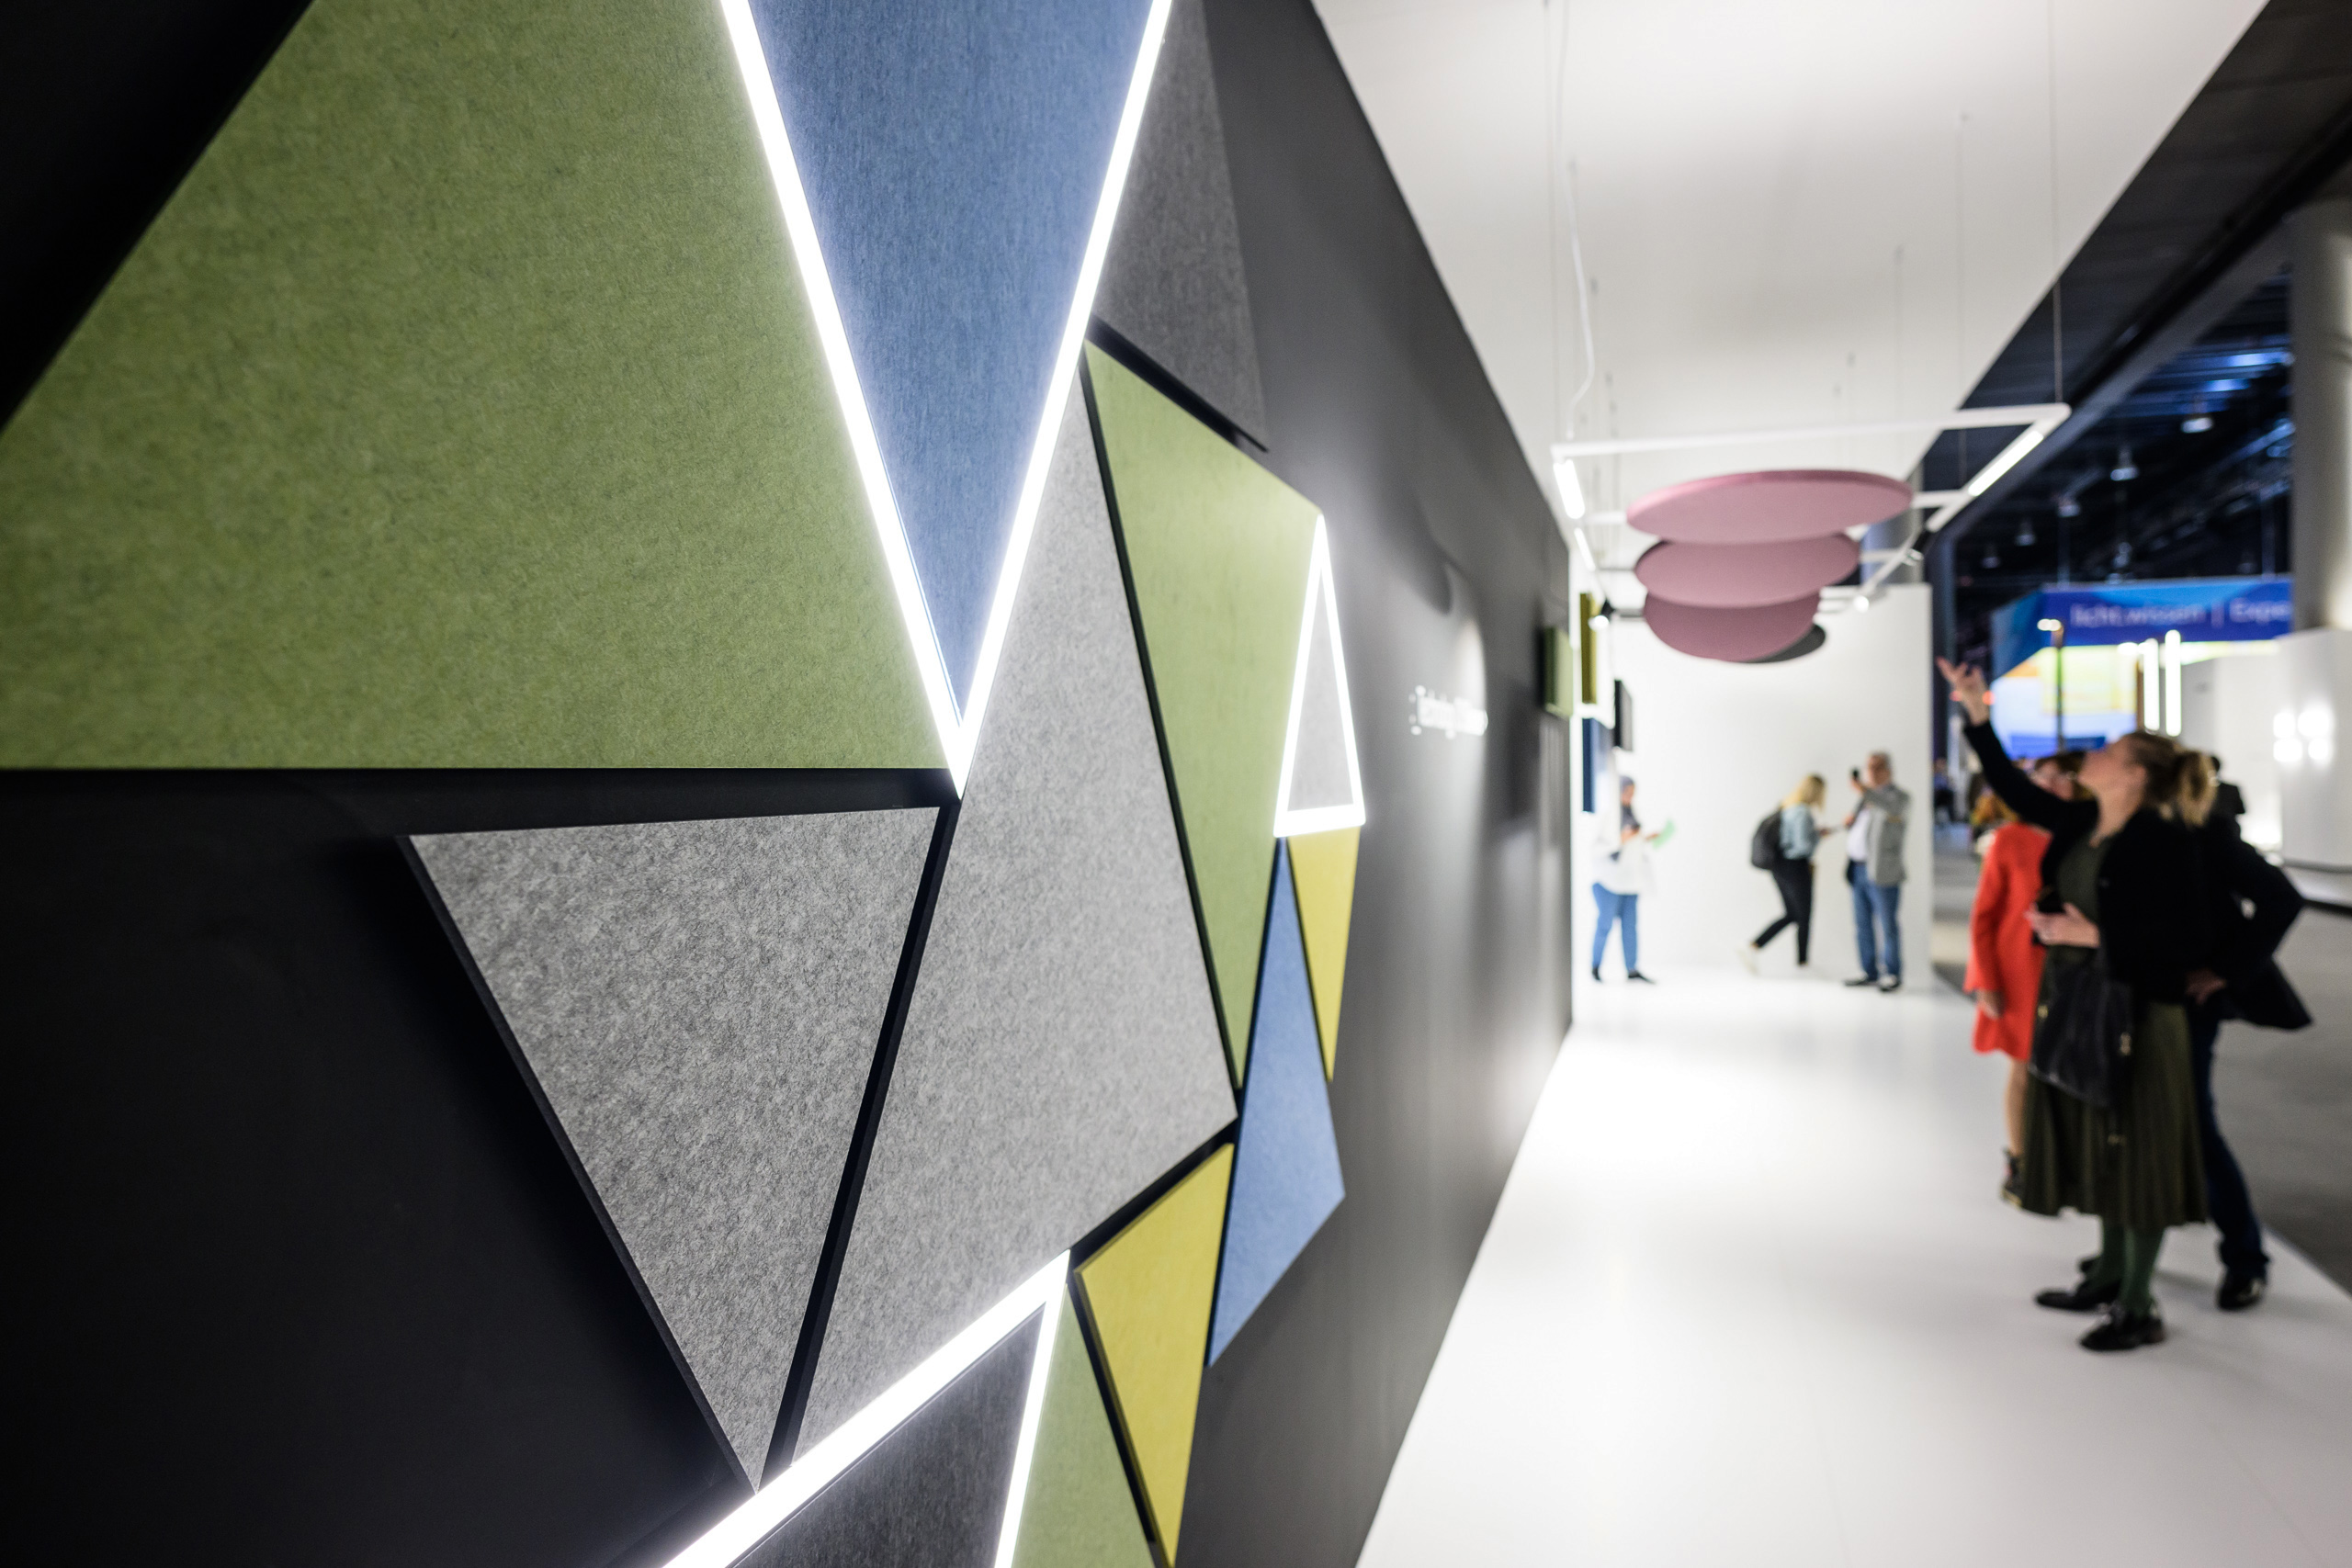 As a design element, noise-absorbing surfaces and lighting elements form a symbiosis